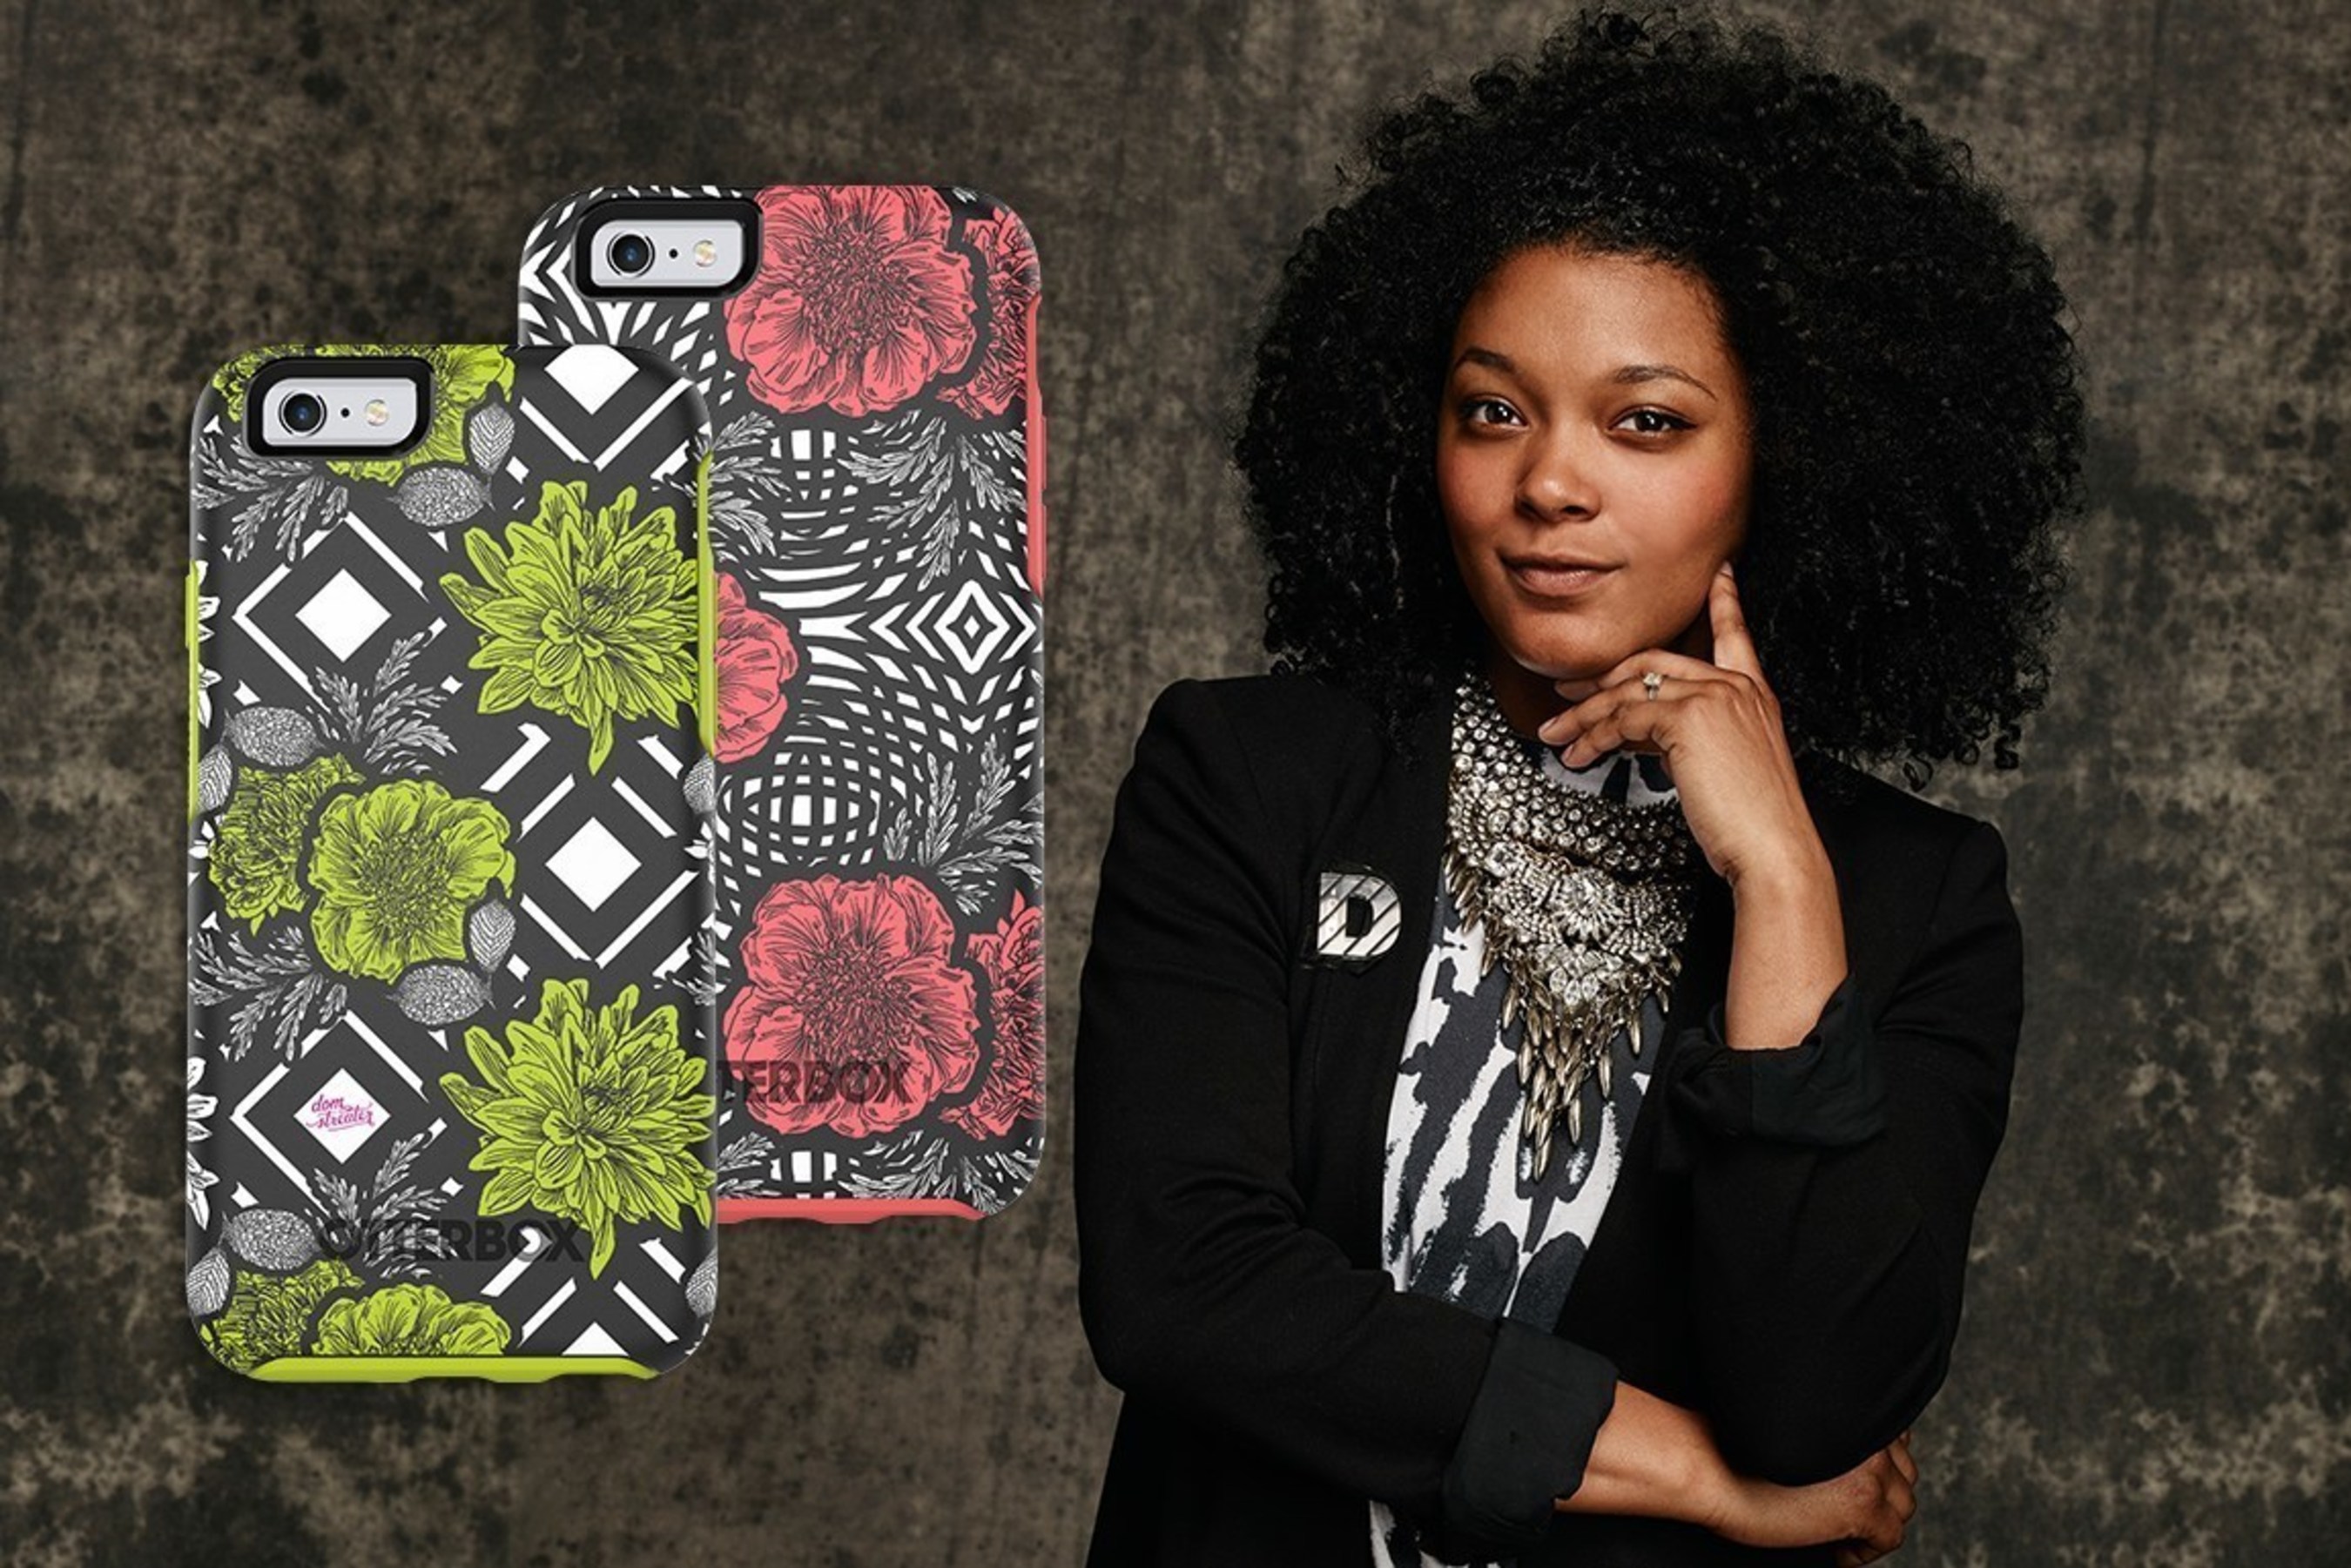 'Green Diamond' and 'Pink Swirl' Symmetry Series cases are available now for iPhone 6/6s, iPhone 6 Plus/6s Plus and GALAXY S7. The cases were designed in collaboration with Philadelphia-based designer and Project Runway All Stars contestant Dom Streater.